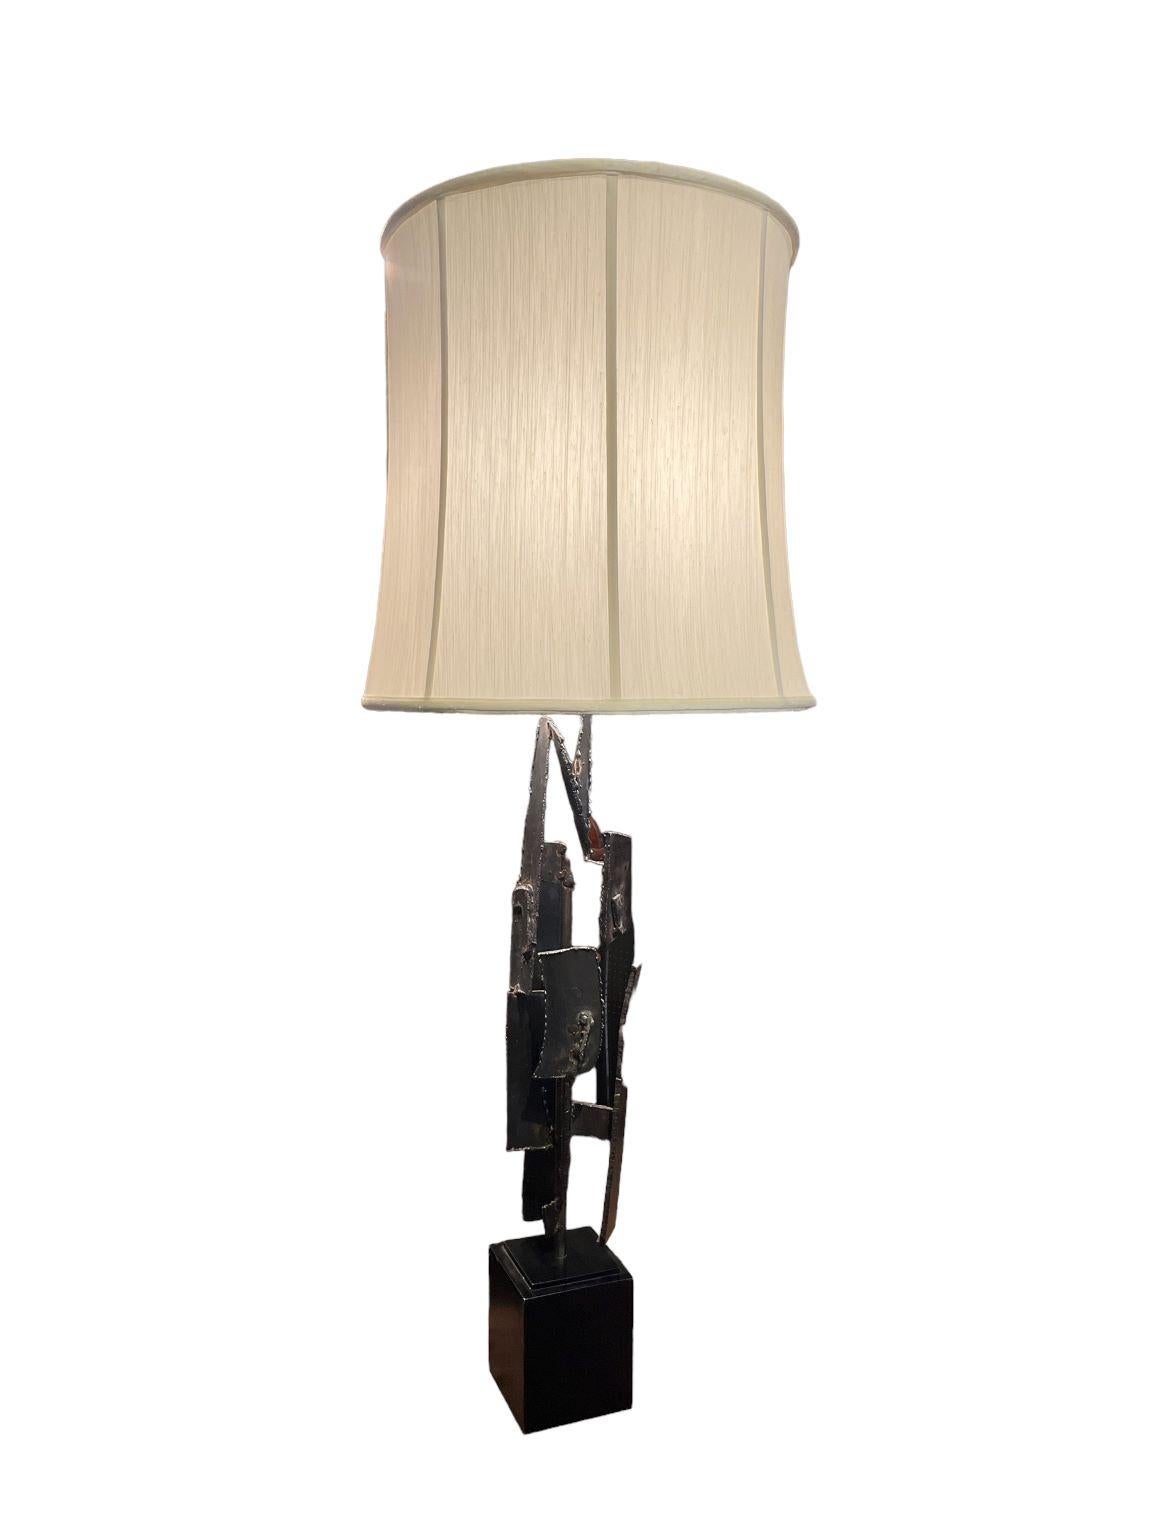 Mid-Century Modern Brutalist Lamp by Richard Barr for Laurel Lamp Company C.1970 For Sale 4